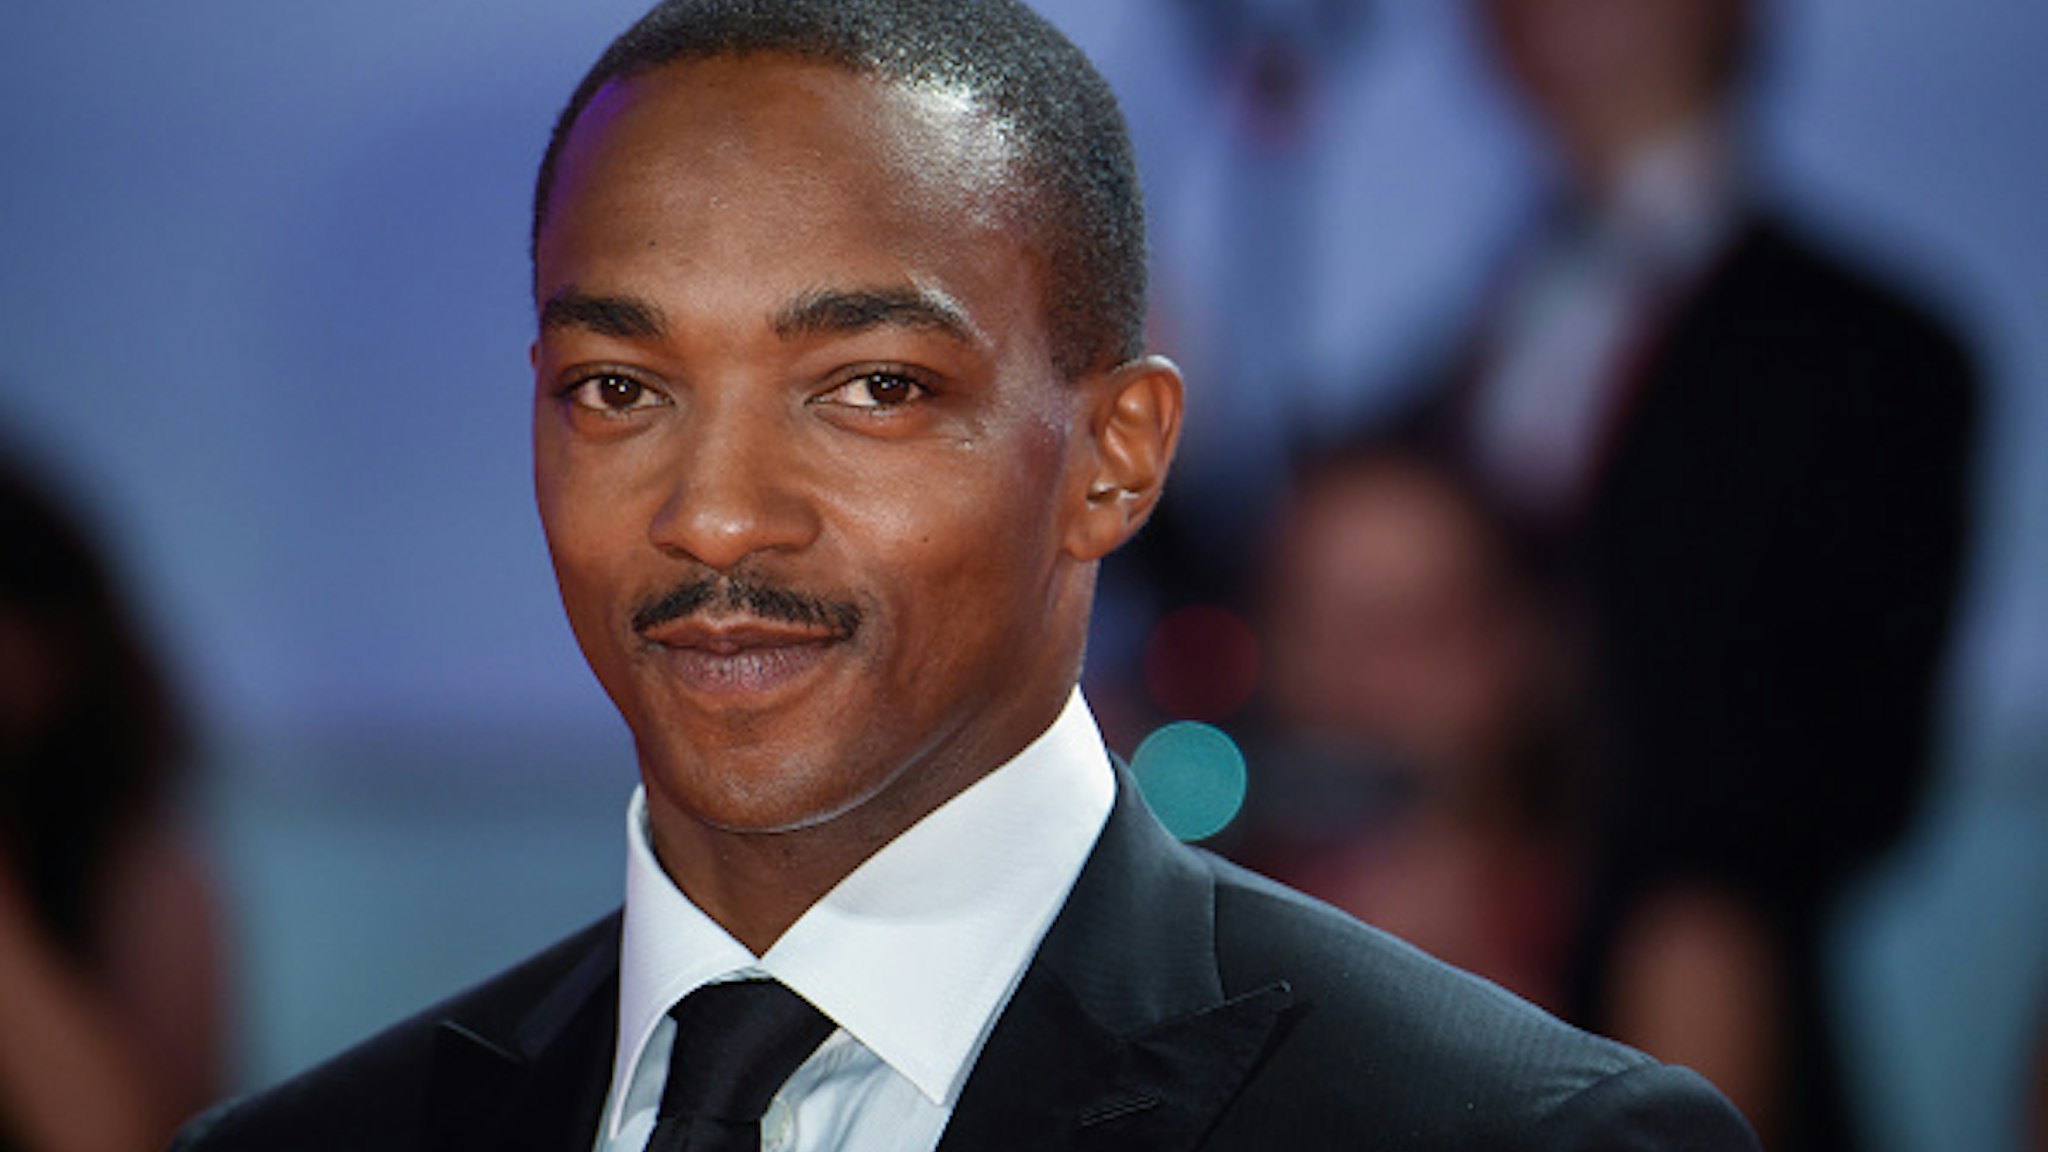 Anthony Mackie at the 76 Venice International Film Festival 2019. Seberg red carpet. Venice (Italy), August 30th, 2019